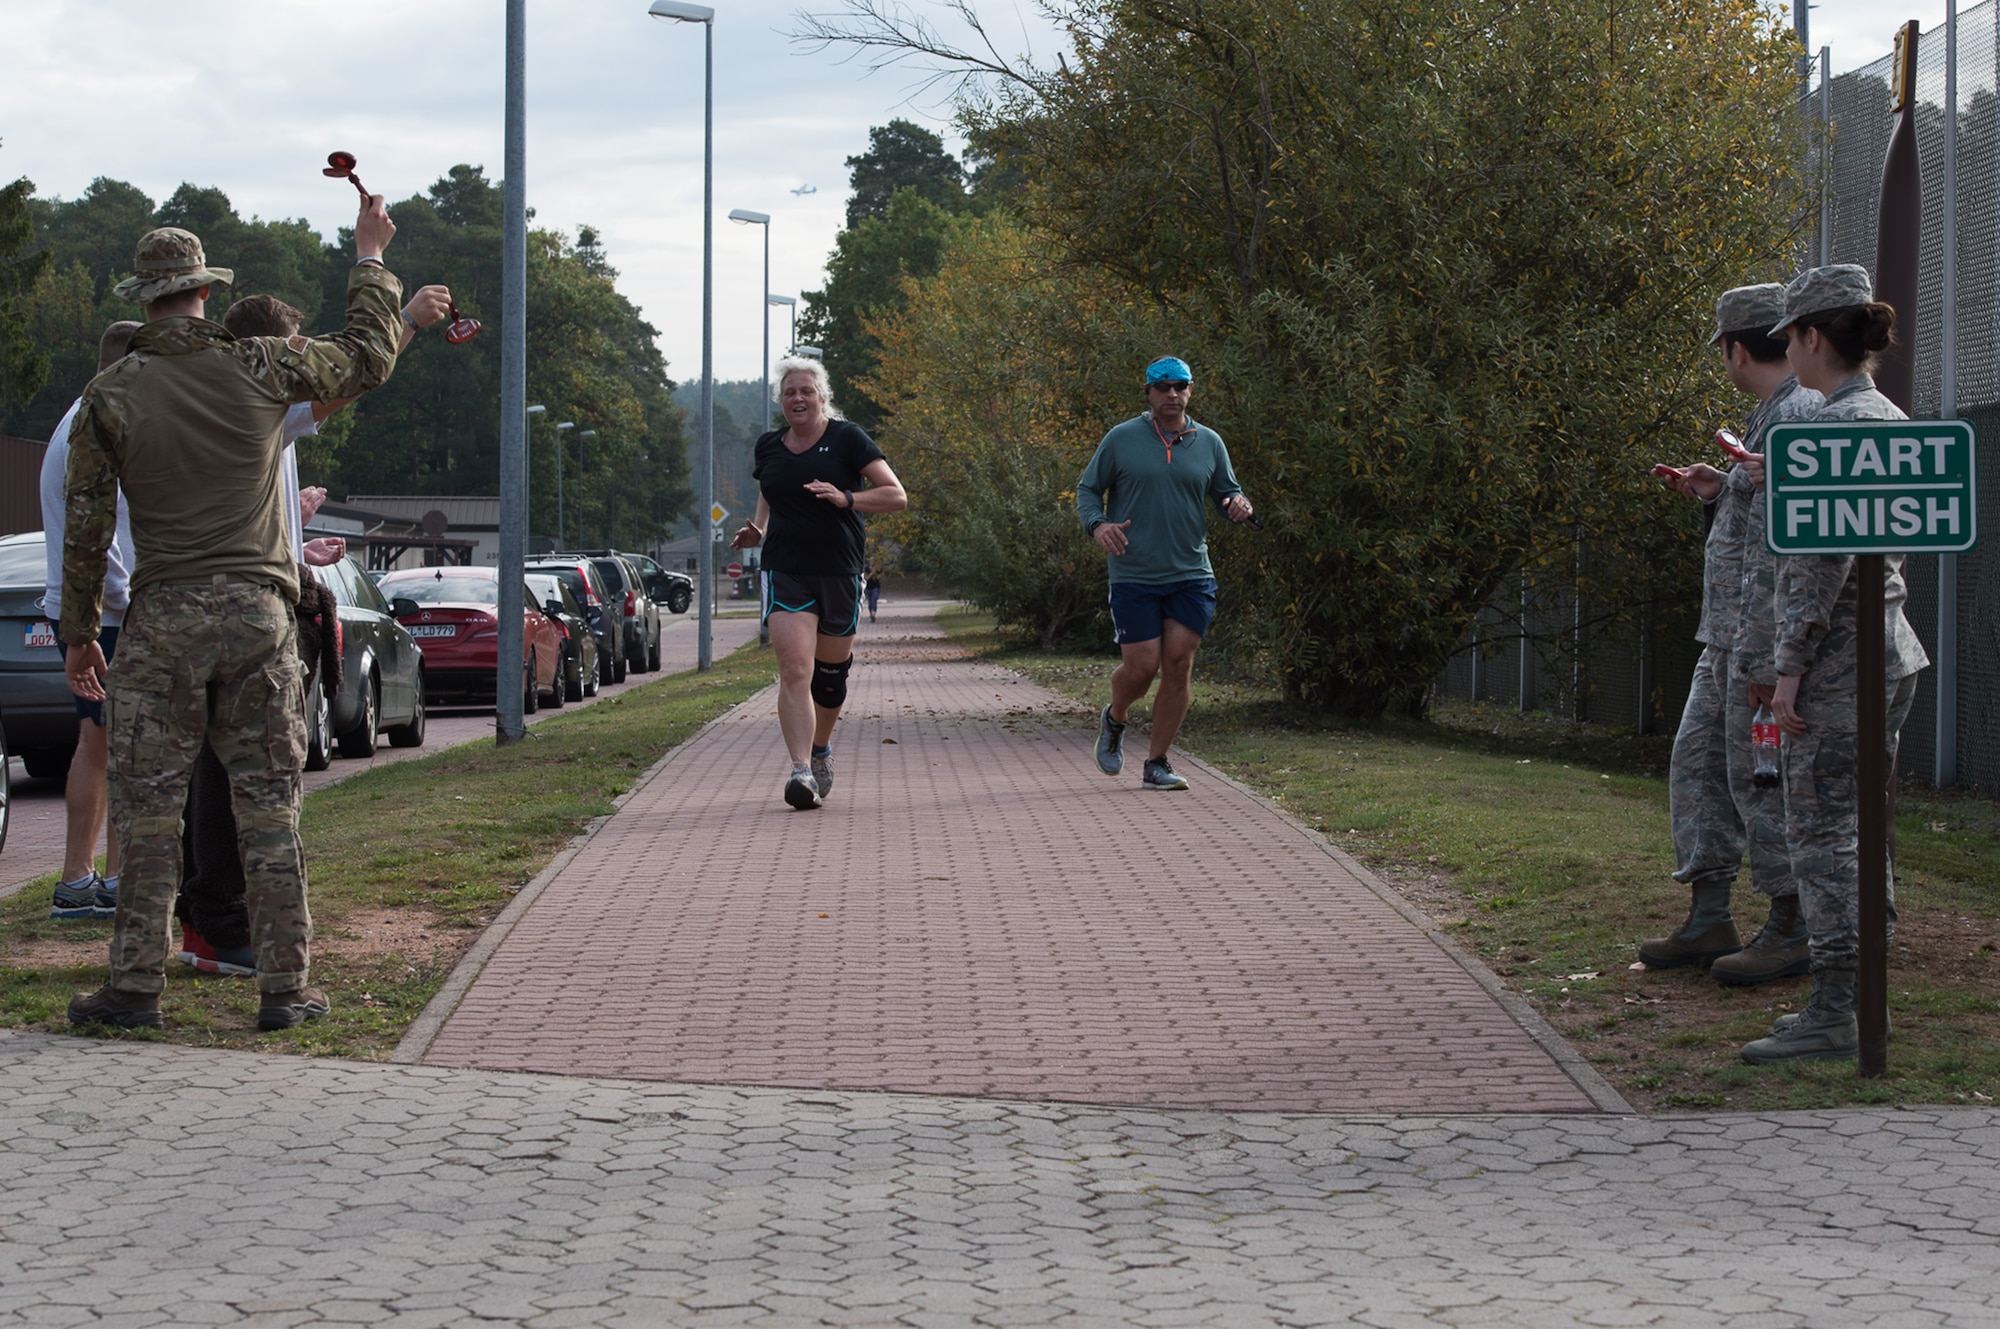 Members of the Kaiserslautern Military Community cross the finish line during the National Preparedness Month 5k Run on Ramstein Air Base, Germany, Sept. 29, 2017. This year’s overarching theme was, “Disasters don’t plan ahead. You can.” (U.S. Air Force photo by Airman 1st Class Devin M. Rumbaugh)